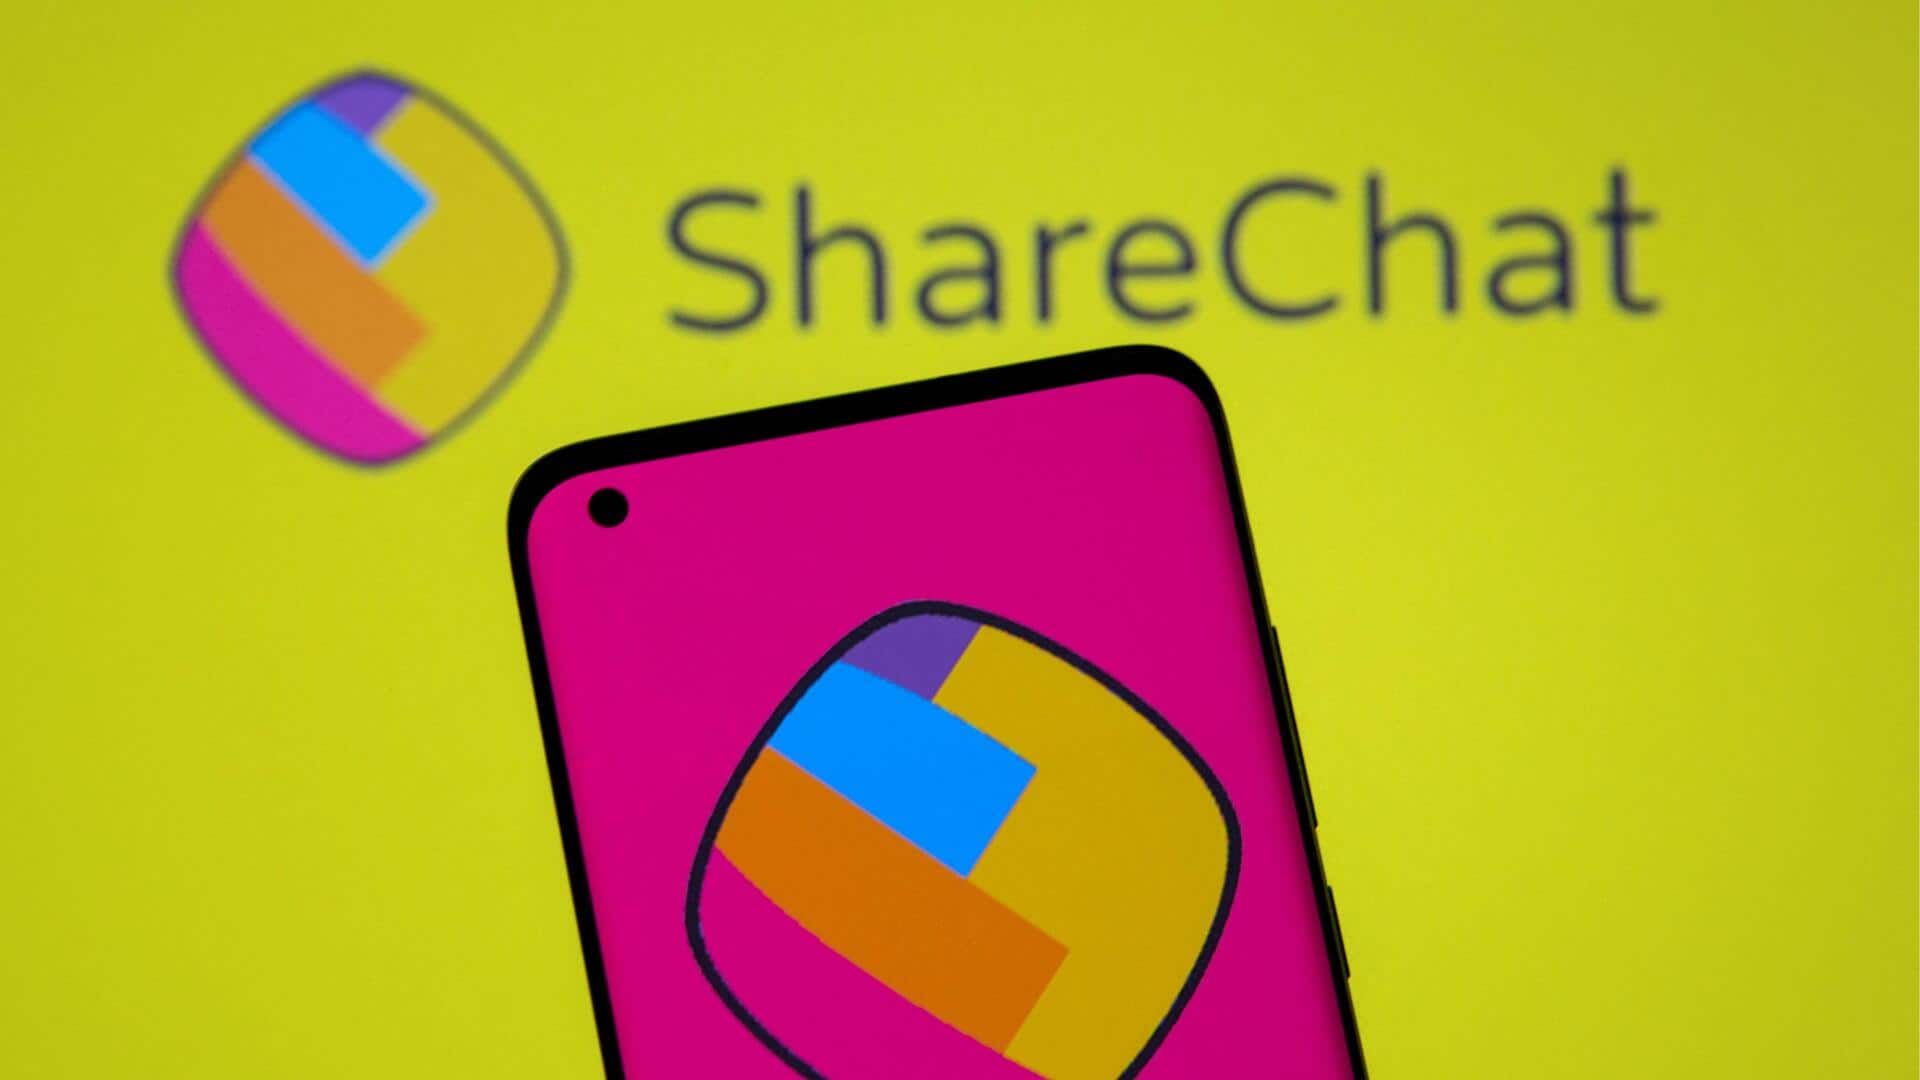 ShareChat lays off 200 employees in a cost-cutting move